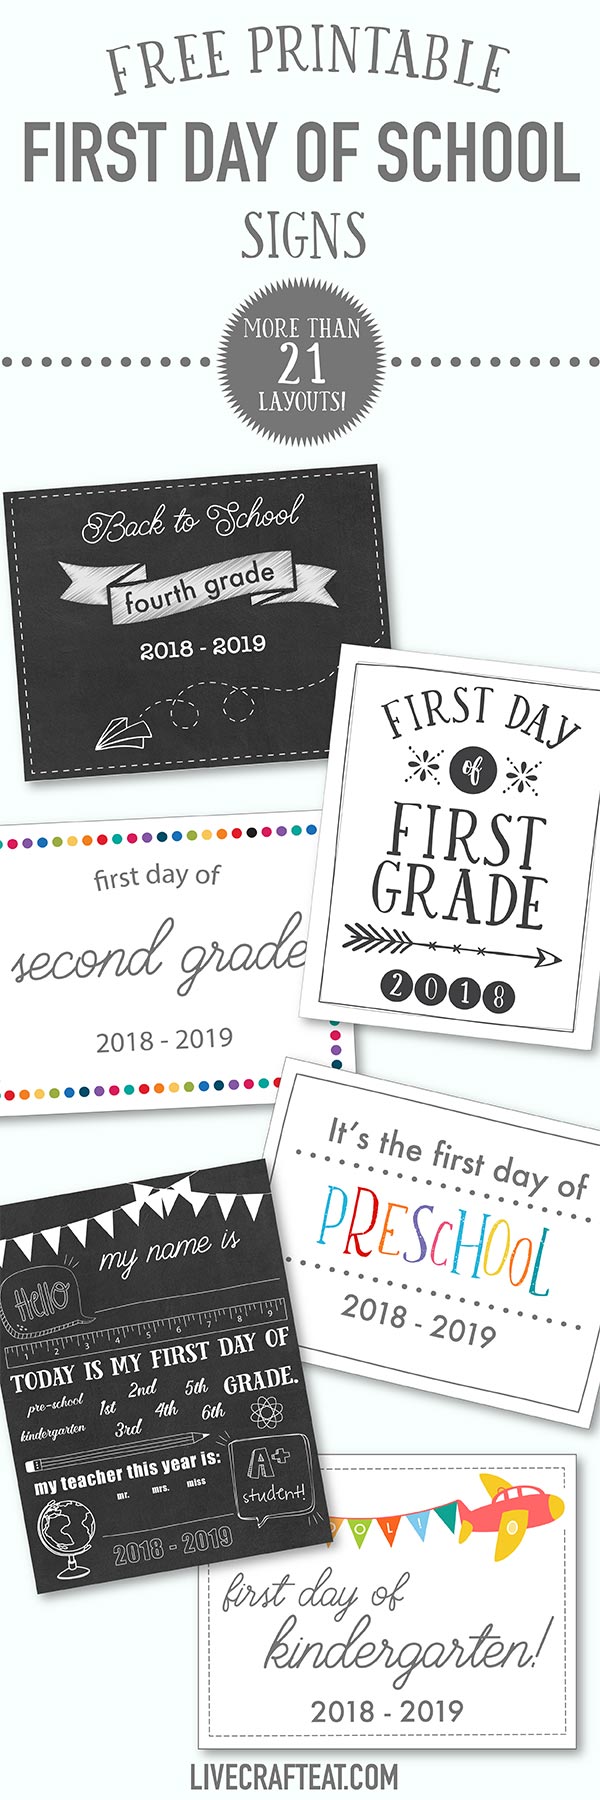 printable first day of school signs